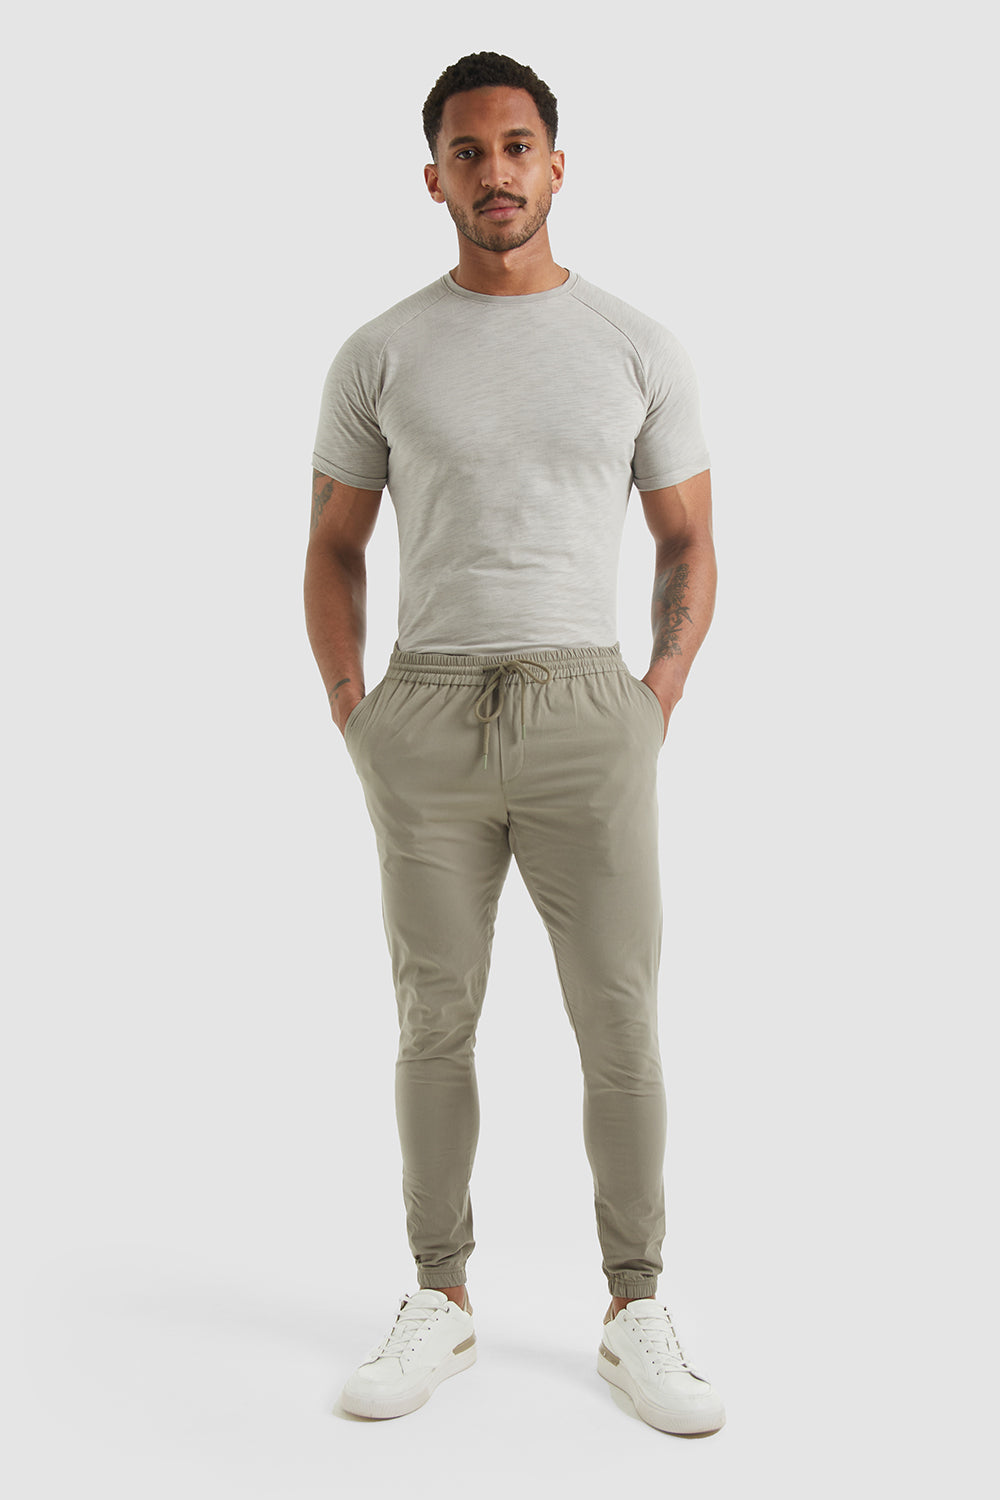 Cuffed Pants for Men - Up to 73% off